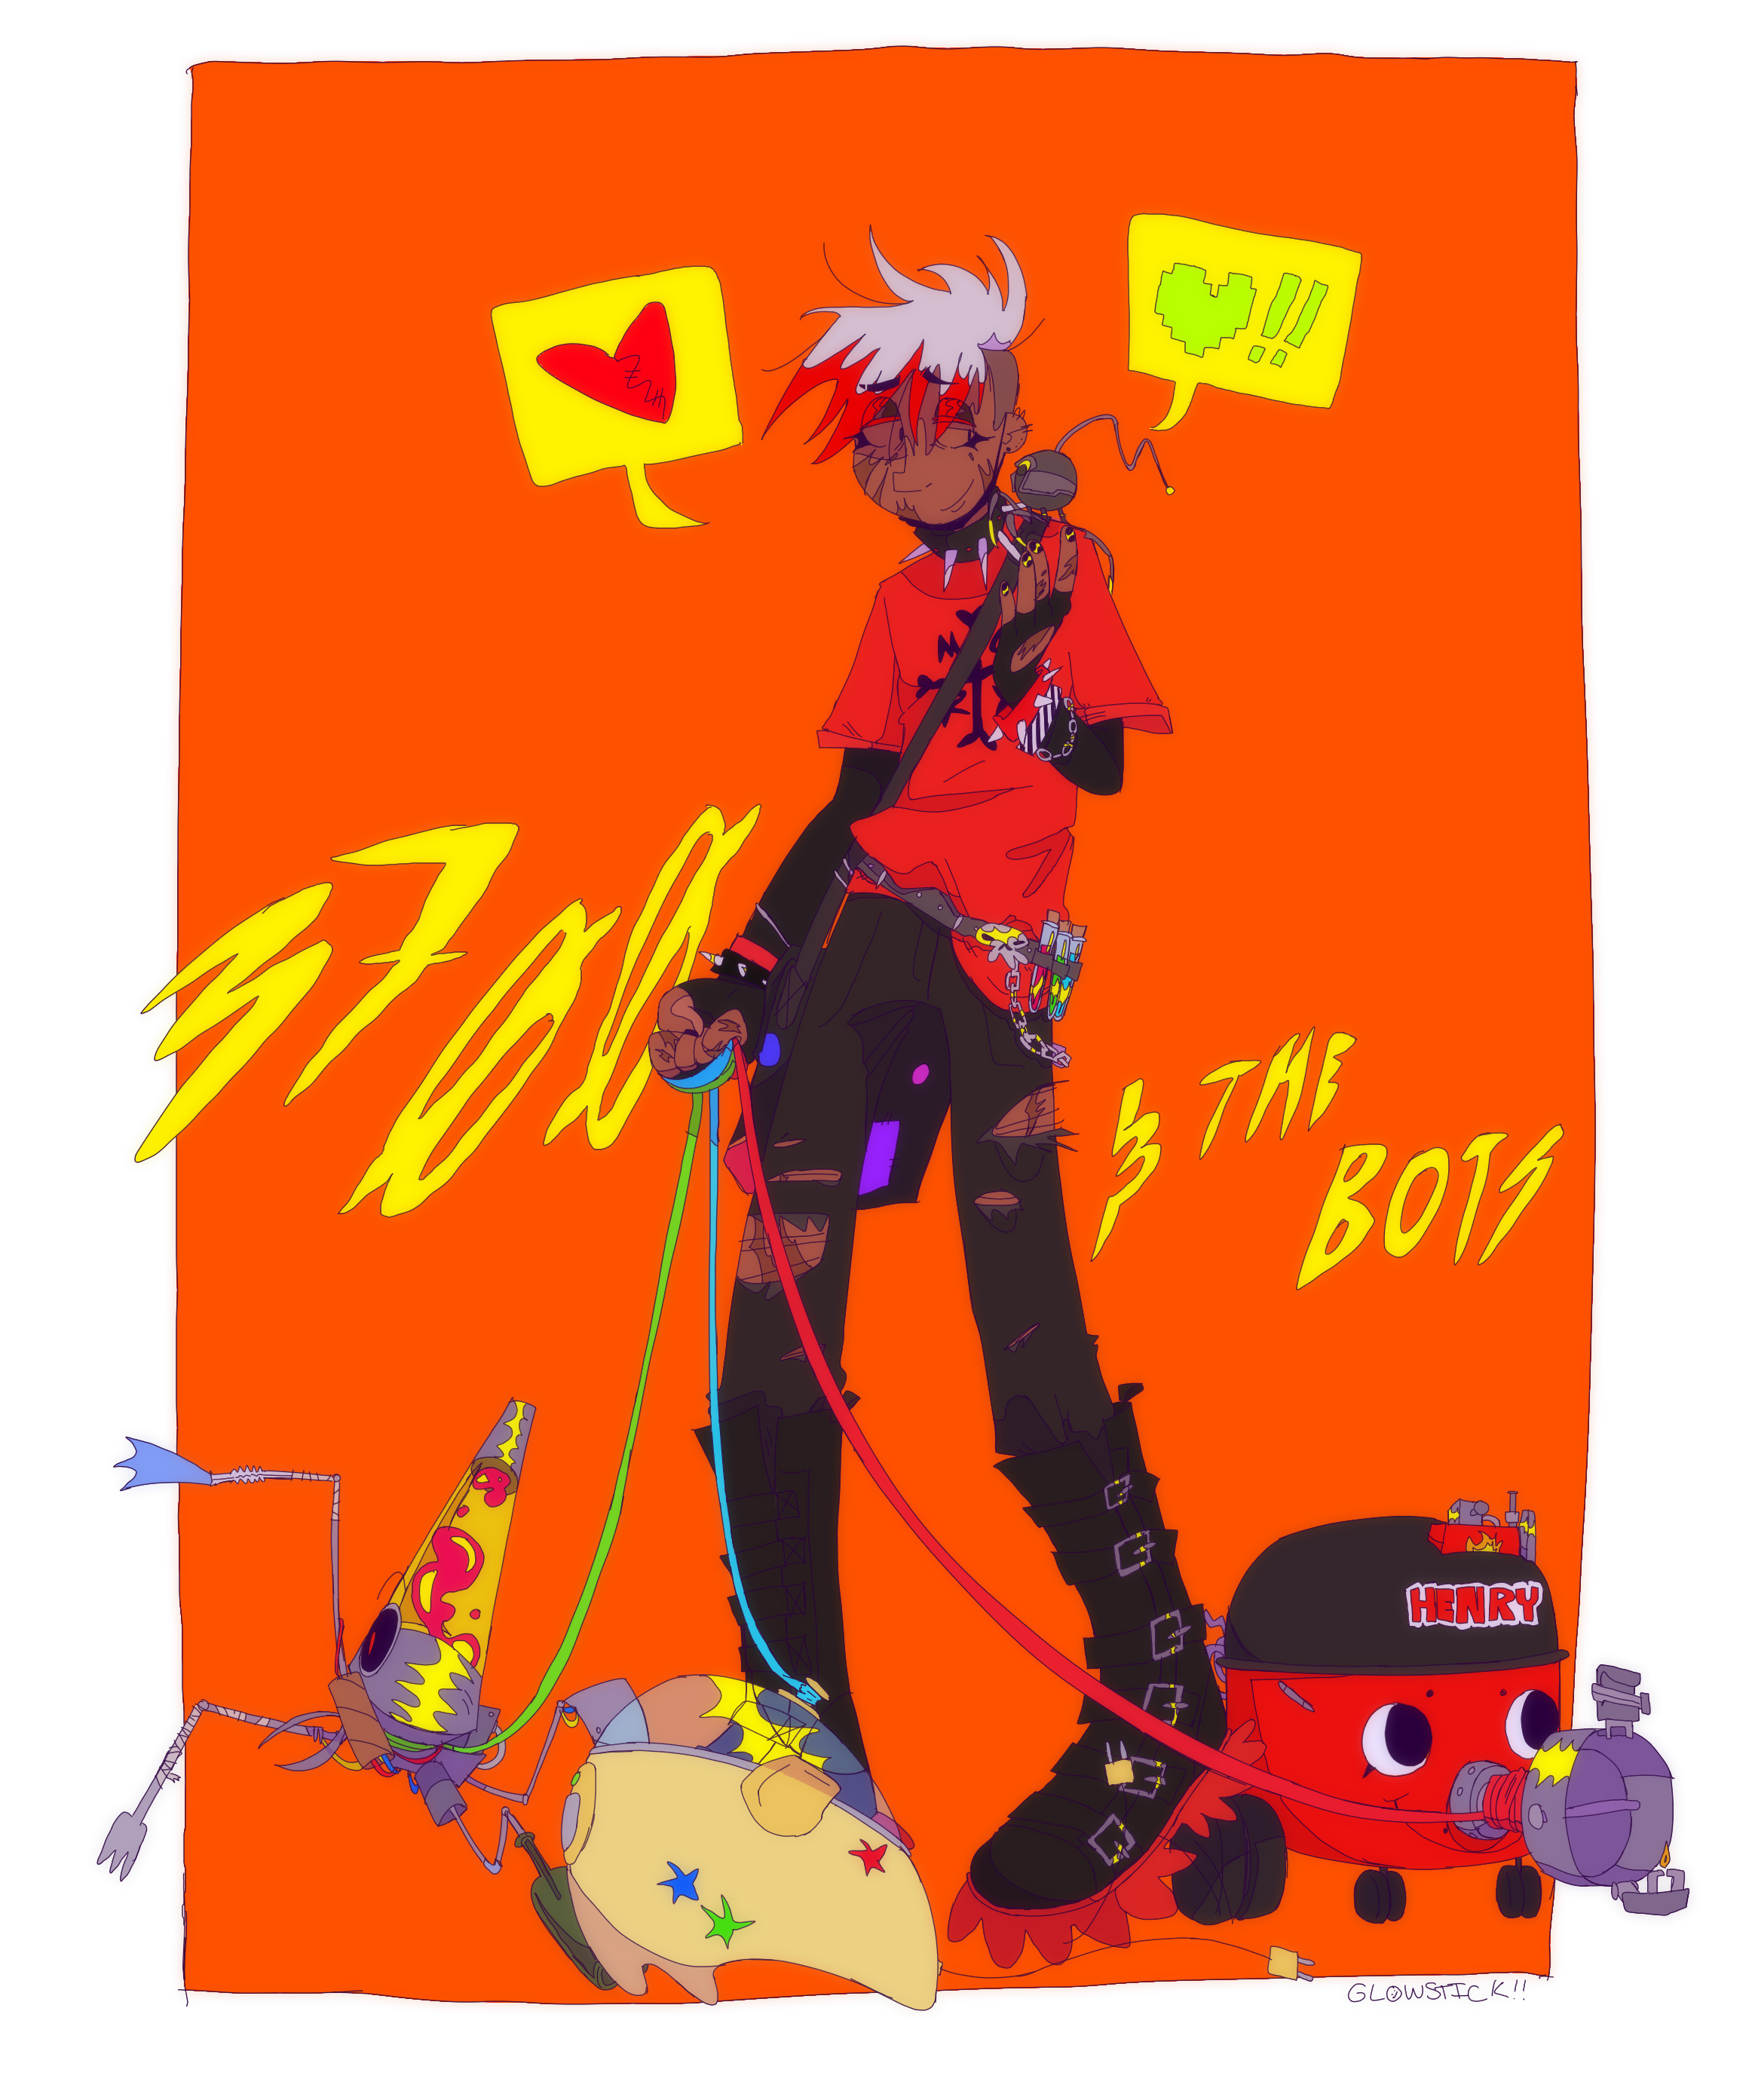 A drawing of a dark-skinned, light-haired child with three robots on leashes, and one on his shoulder. He is wearing a red MCR shirt, ripped jeans, and various punk-styled accessories. The first robot is made primarily from a lava lamp, the second is made from an egg cooker, and the third is a modified Henry Hoover vaccum. The robot on ais shoulder is a round grey sphere with three legs and a single bent antennae. The background is an orange square with yellow block letters that say '3700 and the bots' across the image.